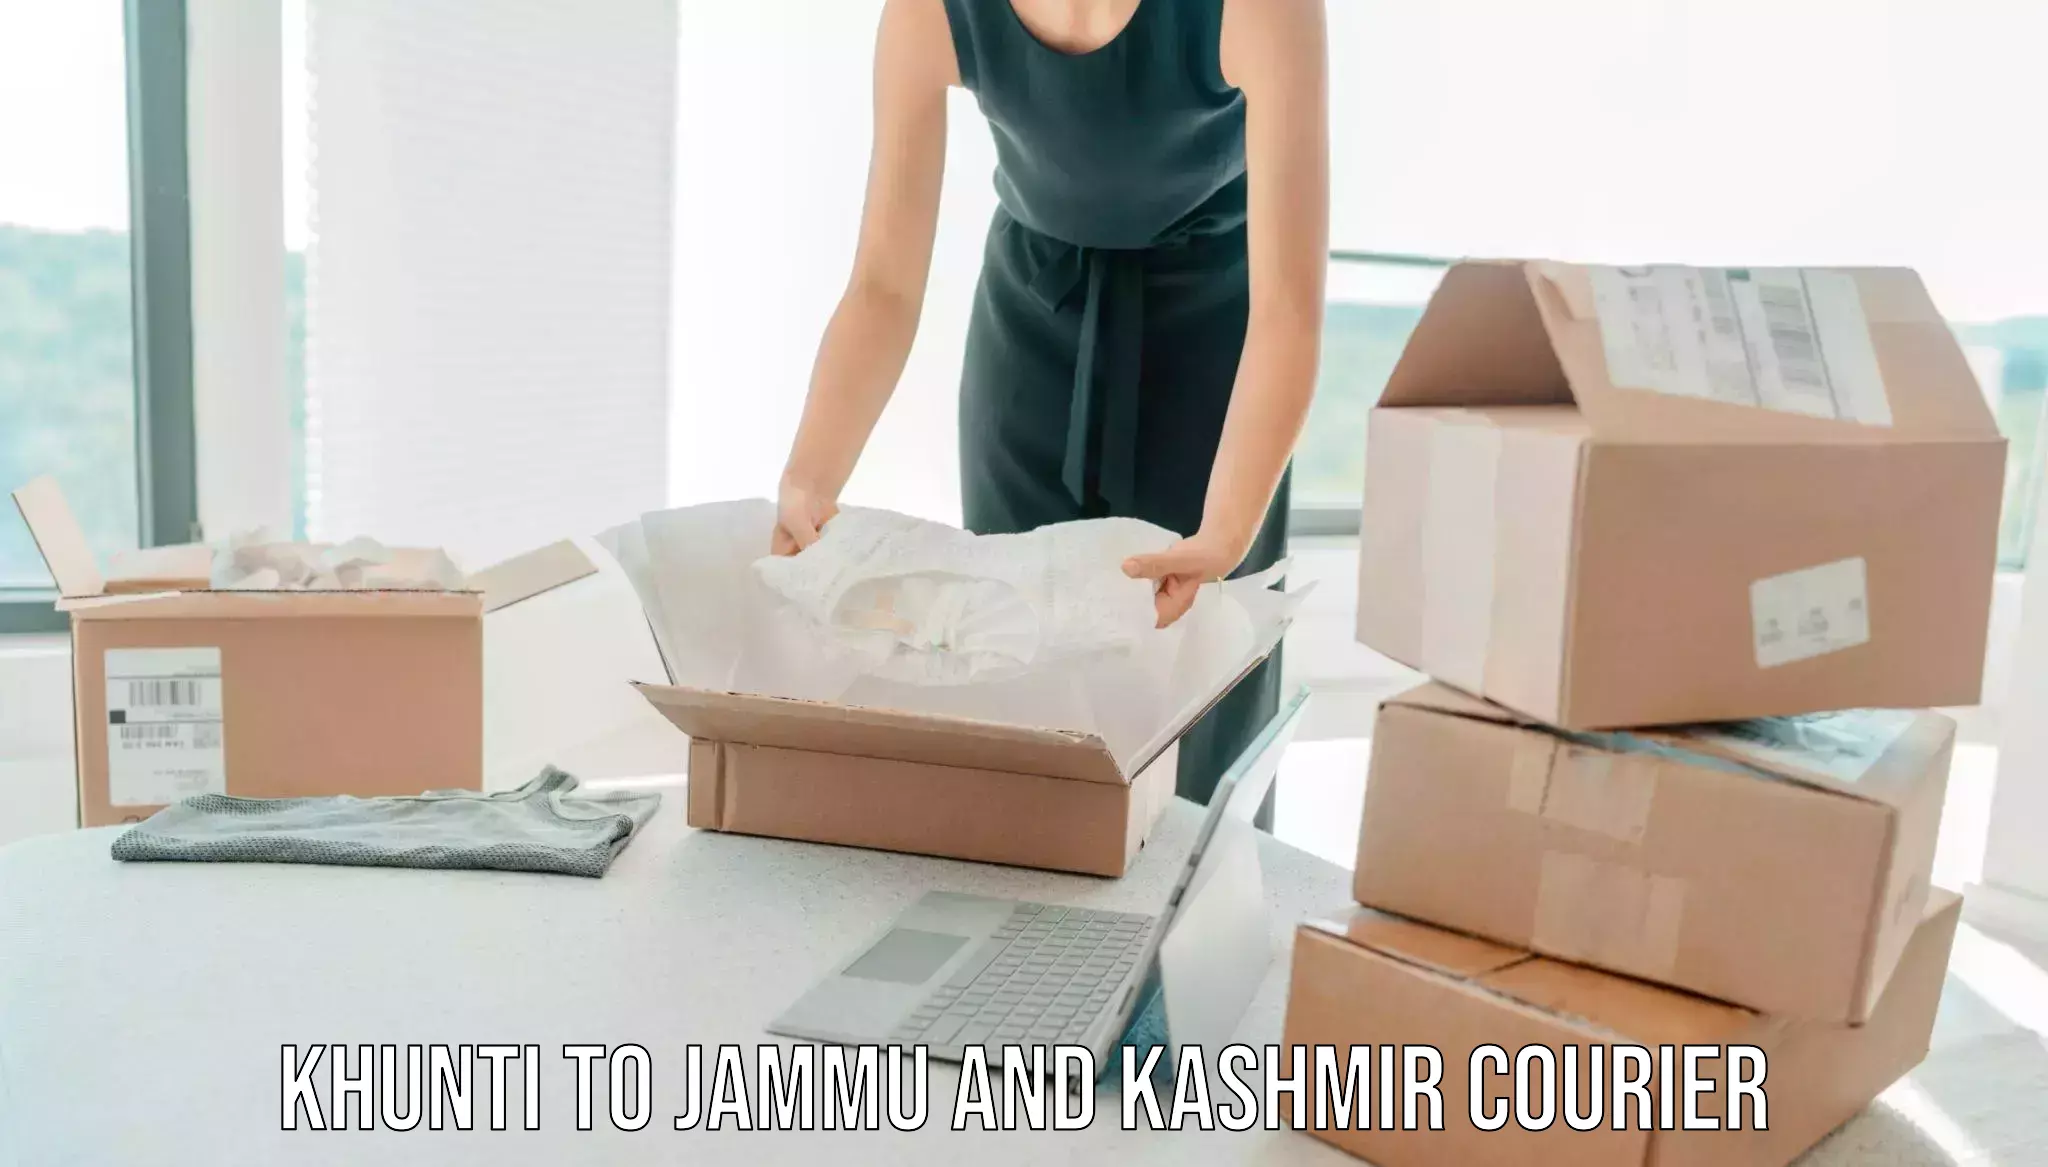 Professional home movers Khunti to Baramulla